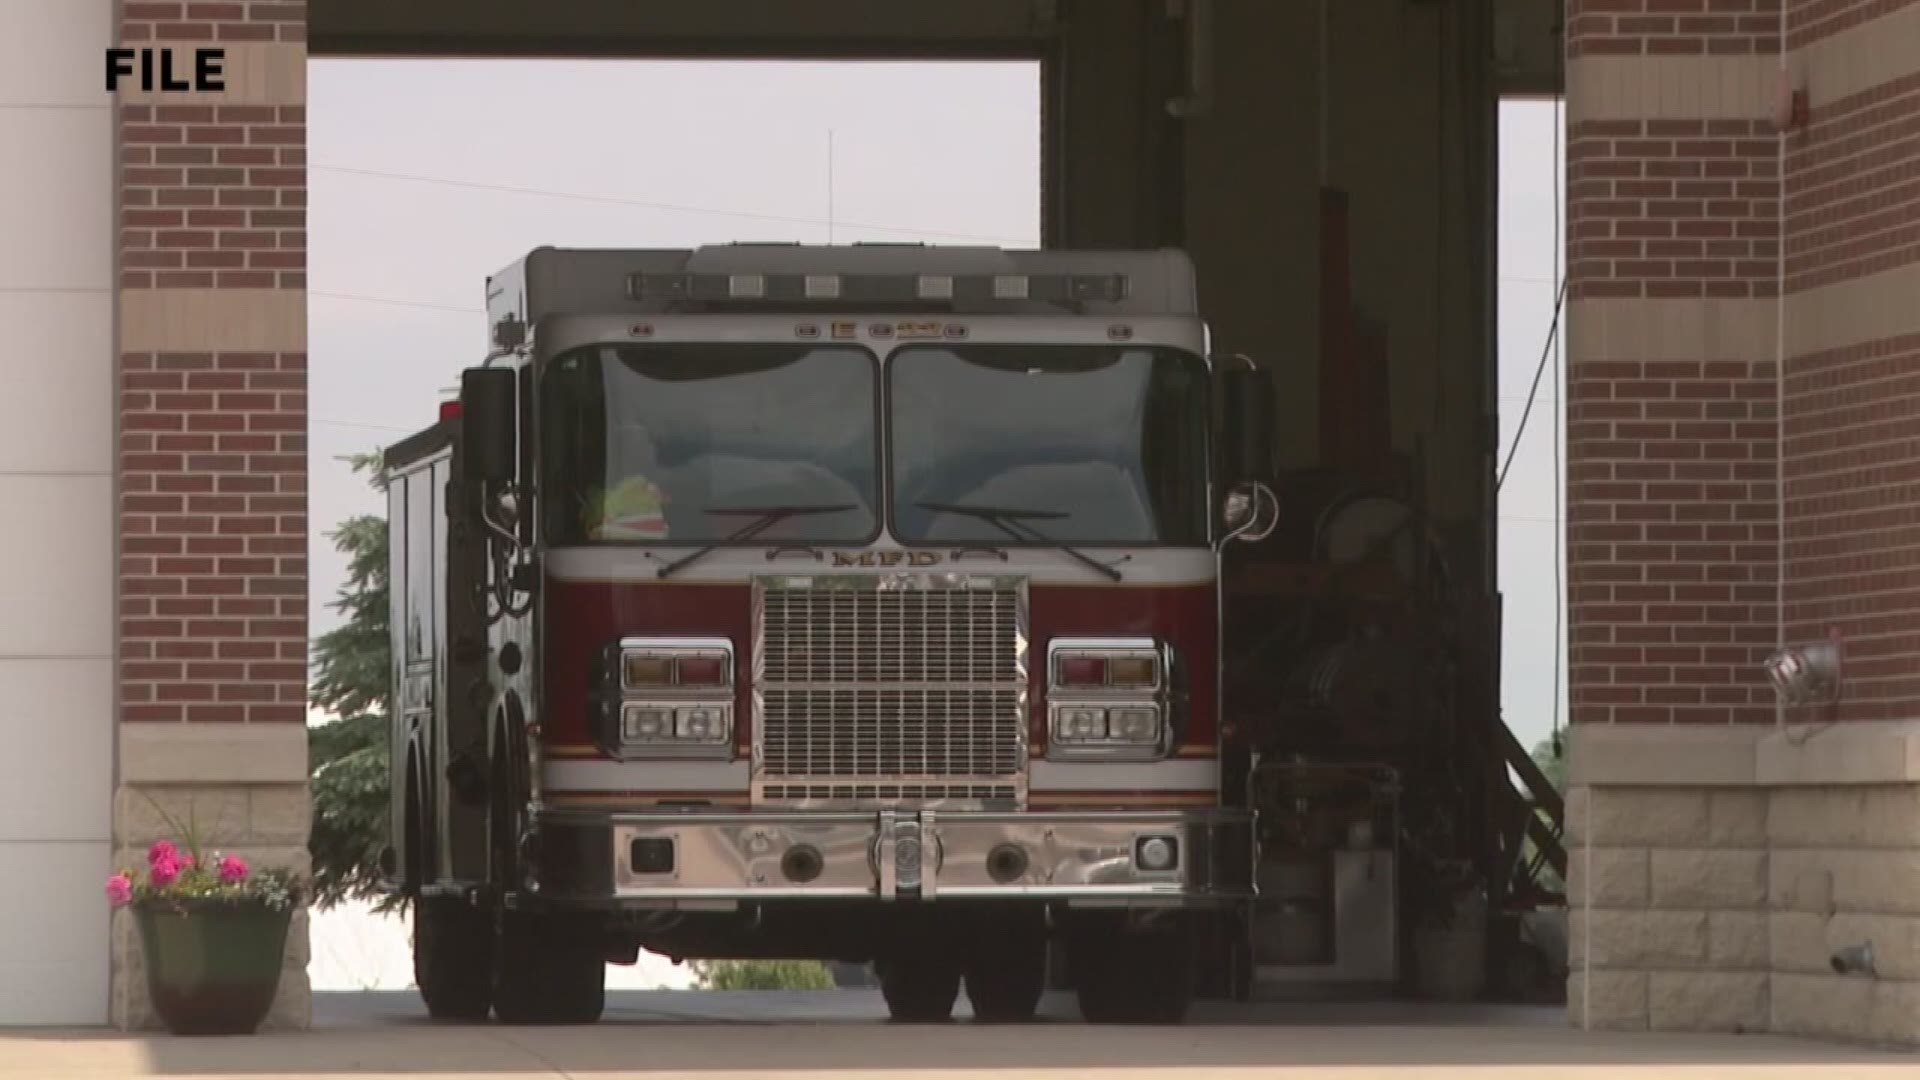 Lawmakers tackle first responders retiree benefits